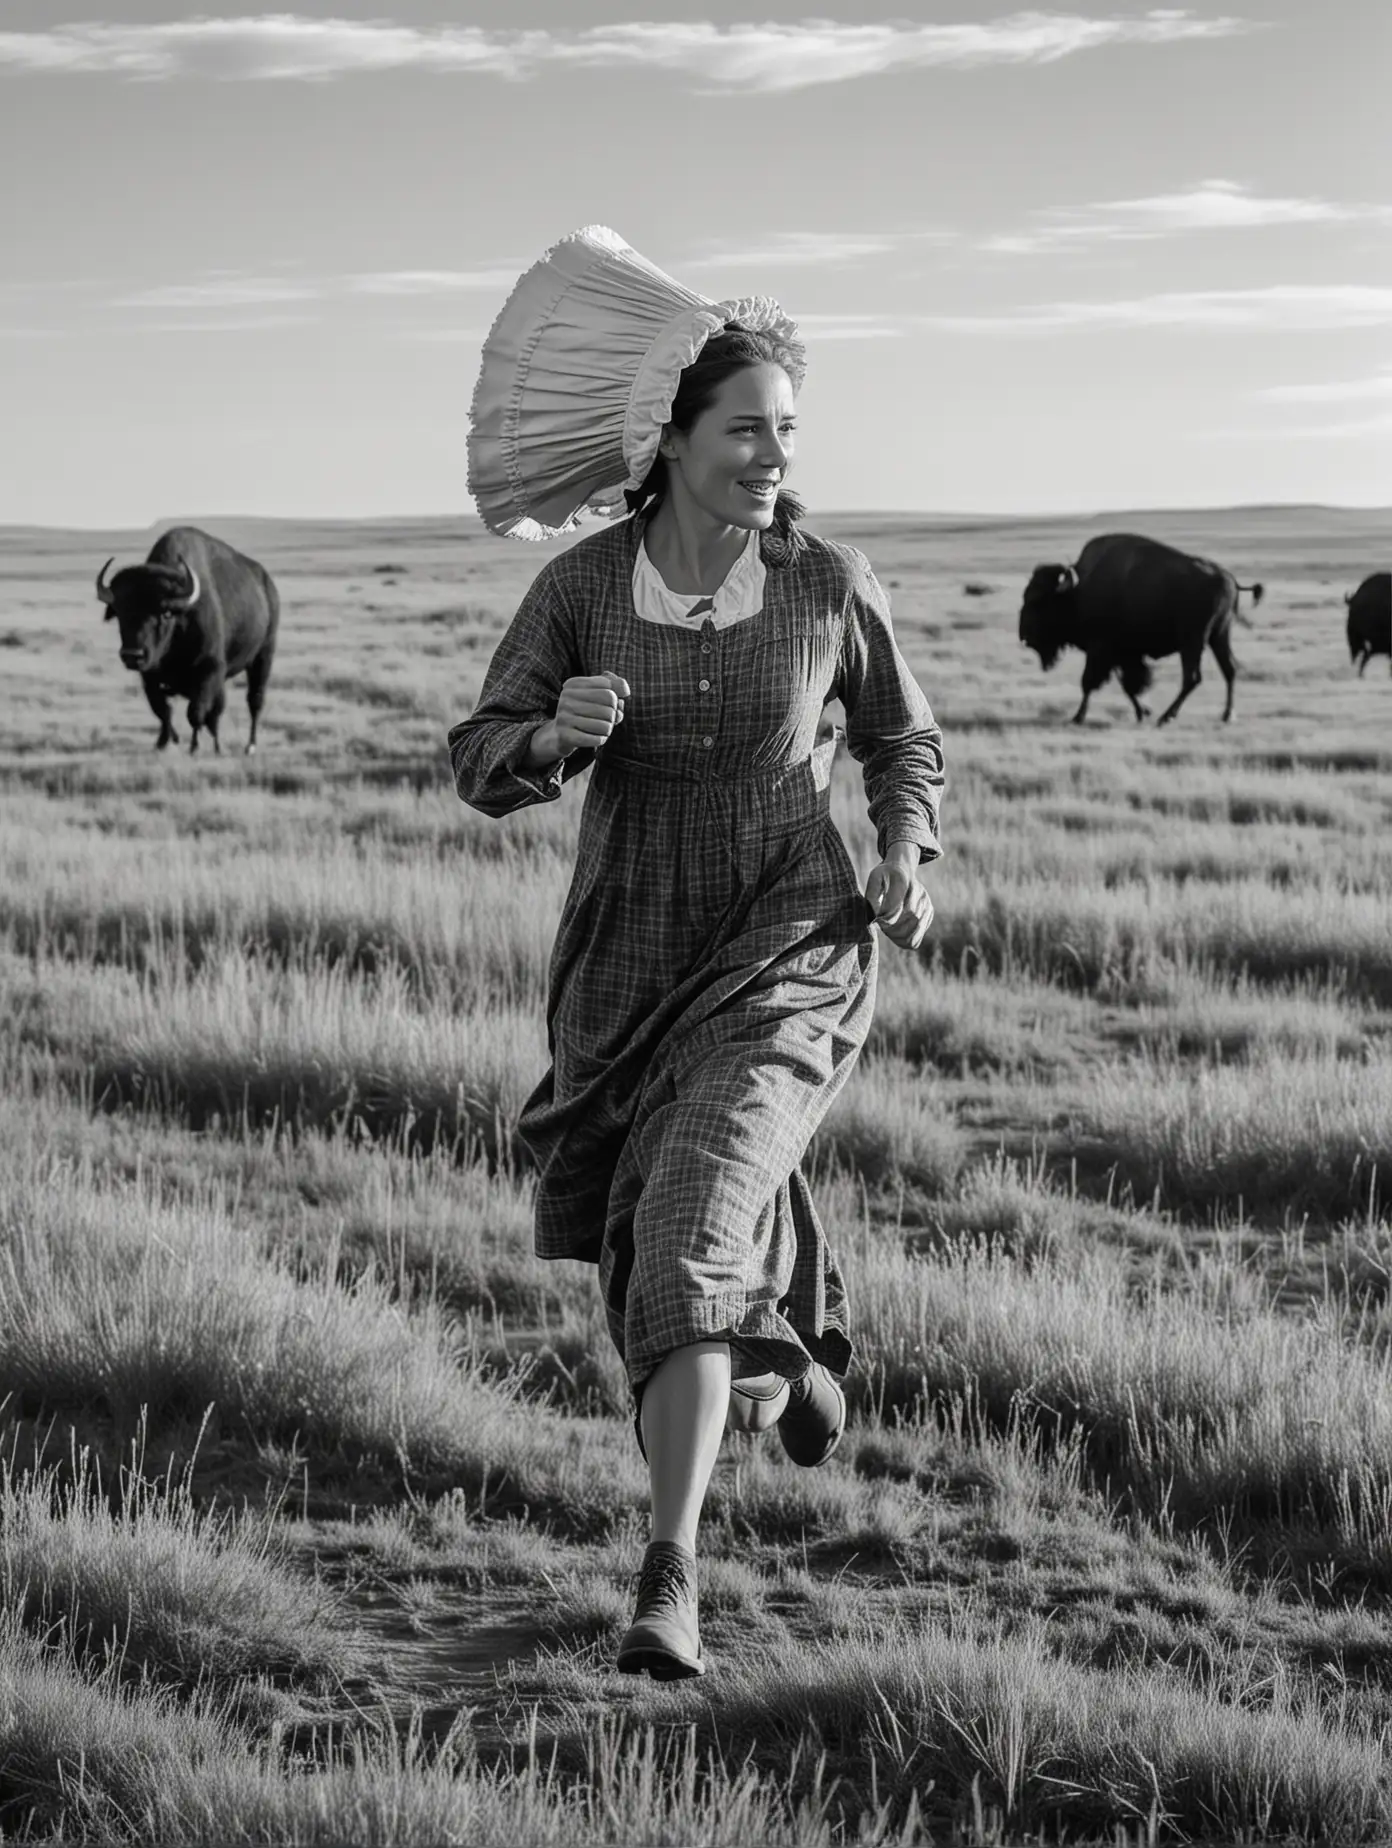 A caucasian woman runs through the prairie. She is a pioneer and wears a bonnet. There are buffalo in the background. She is seen from the side. In black and white. 